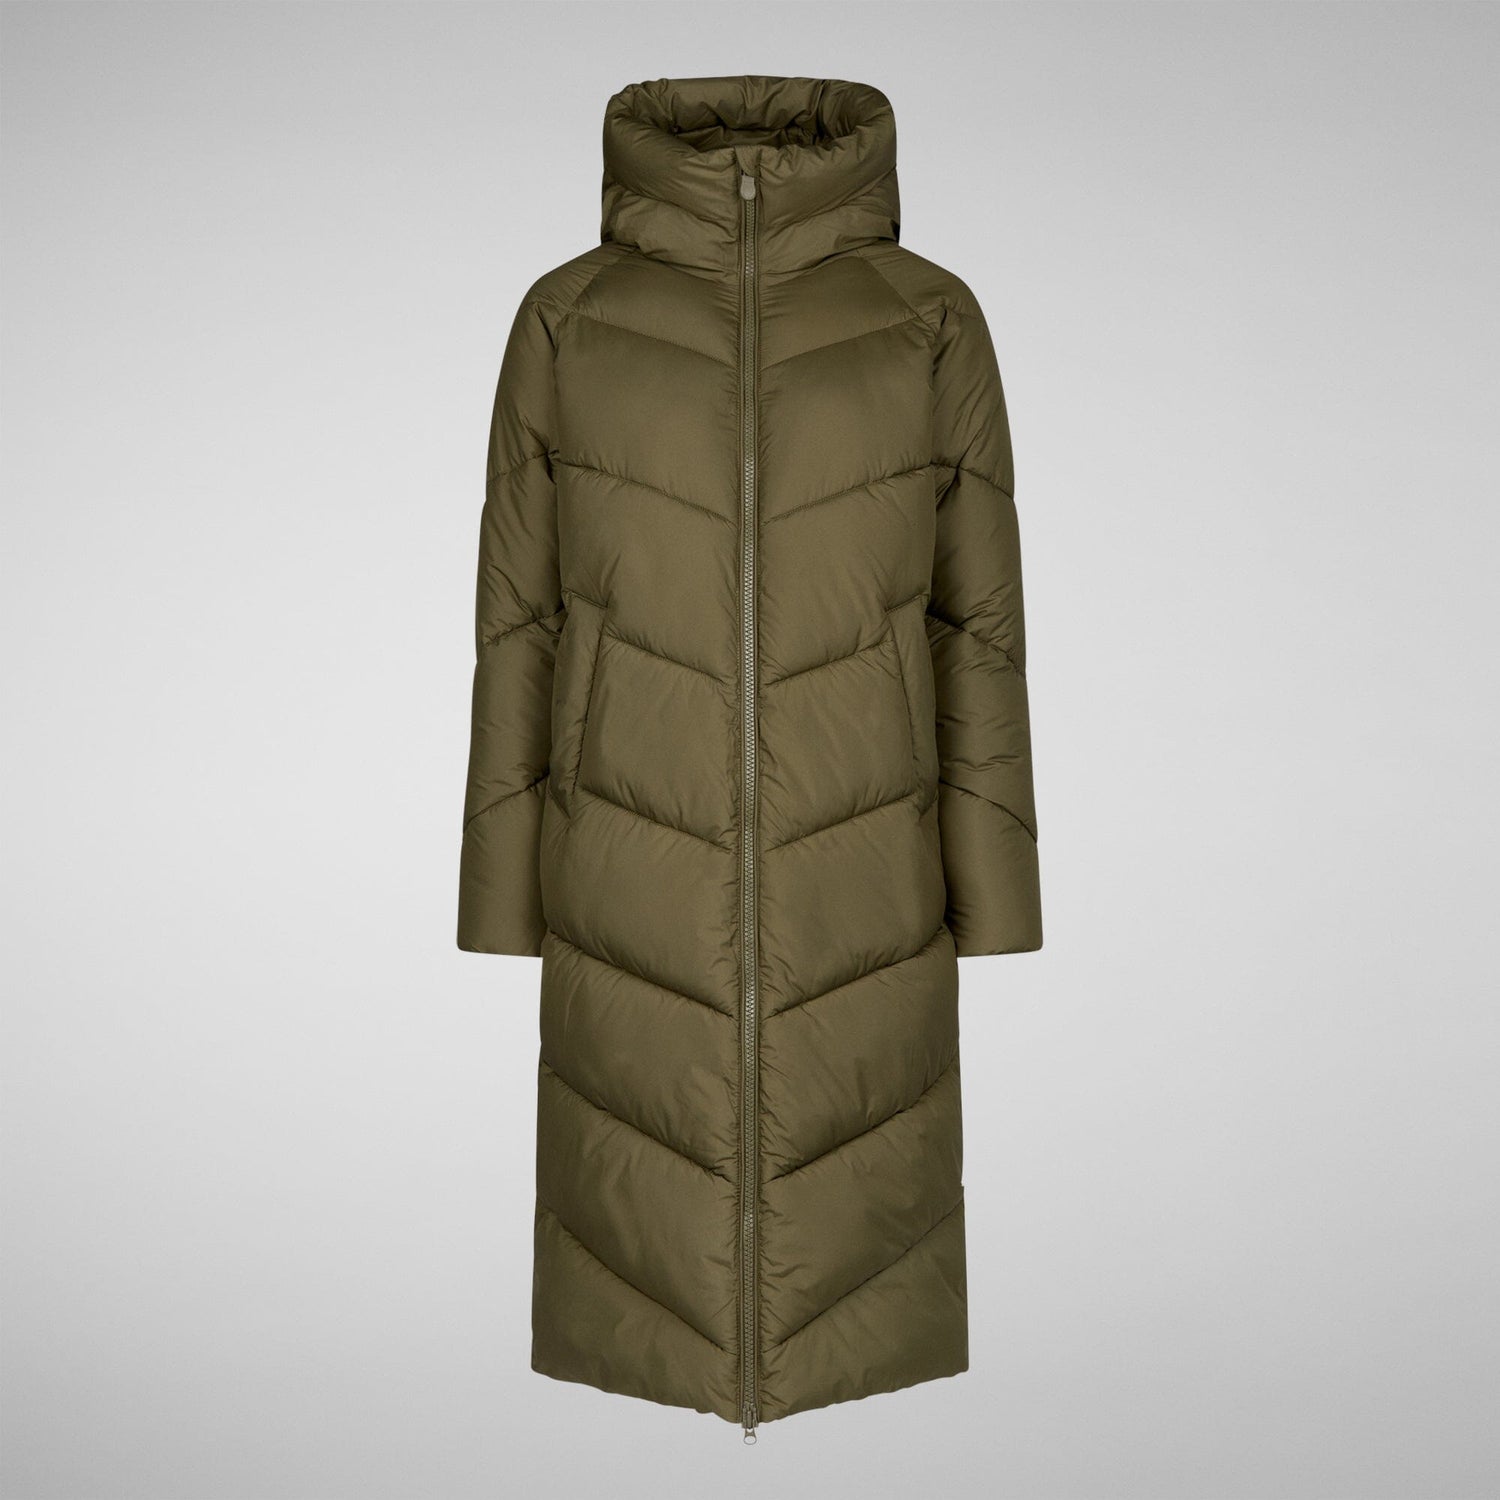 Save The Duck W's Janis Hooded Puffer Jacket - Recycled plastic bottles Sherwood Green Jacket